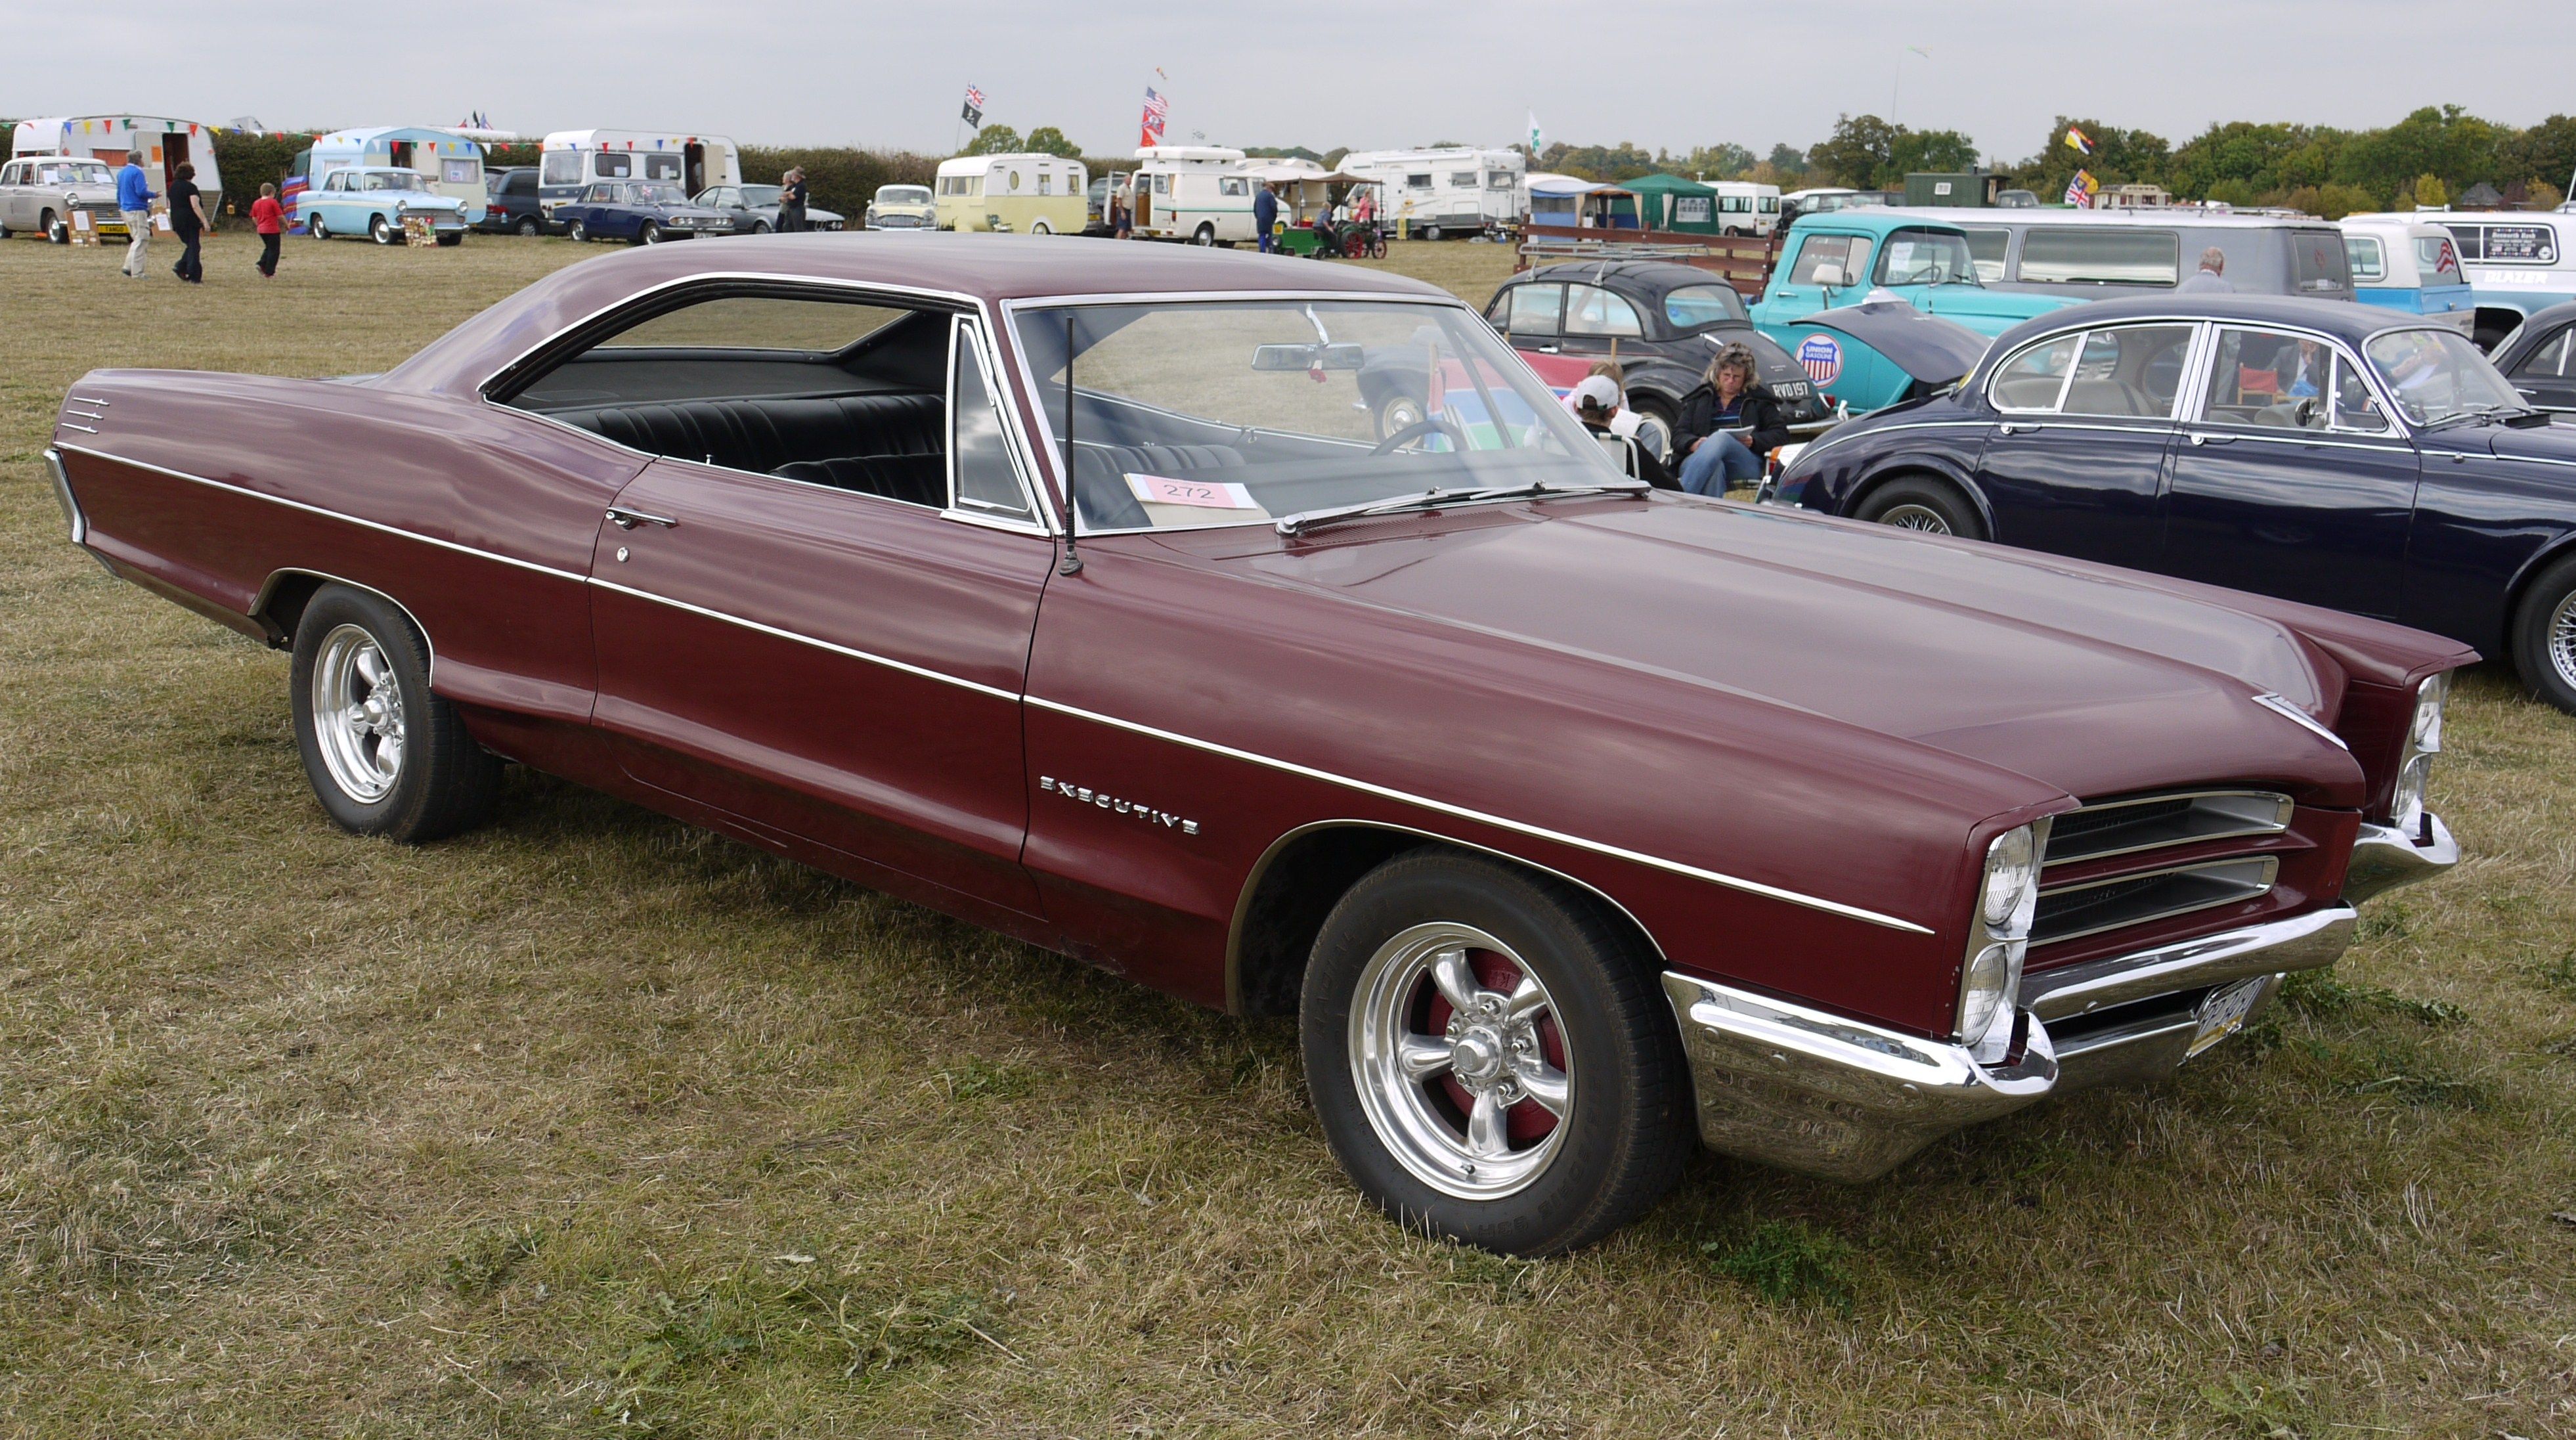 Pontiac Star Chief: The forgotten muscle car.